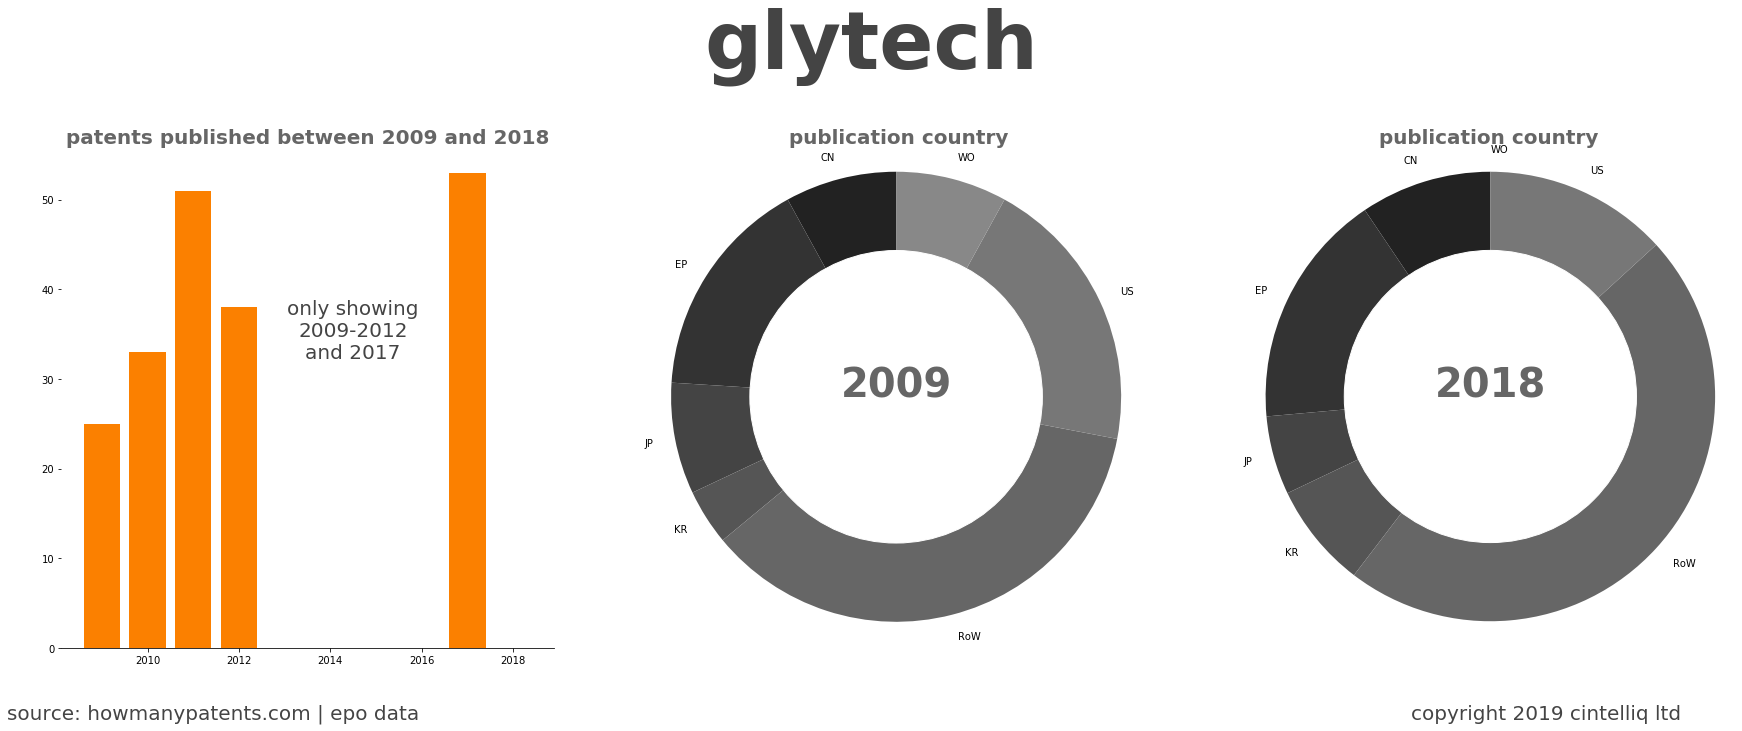 summary of patents for Glytech